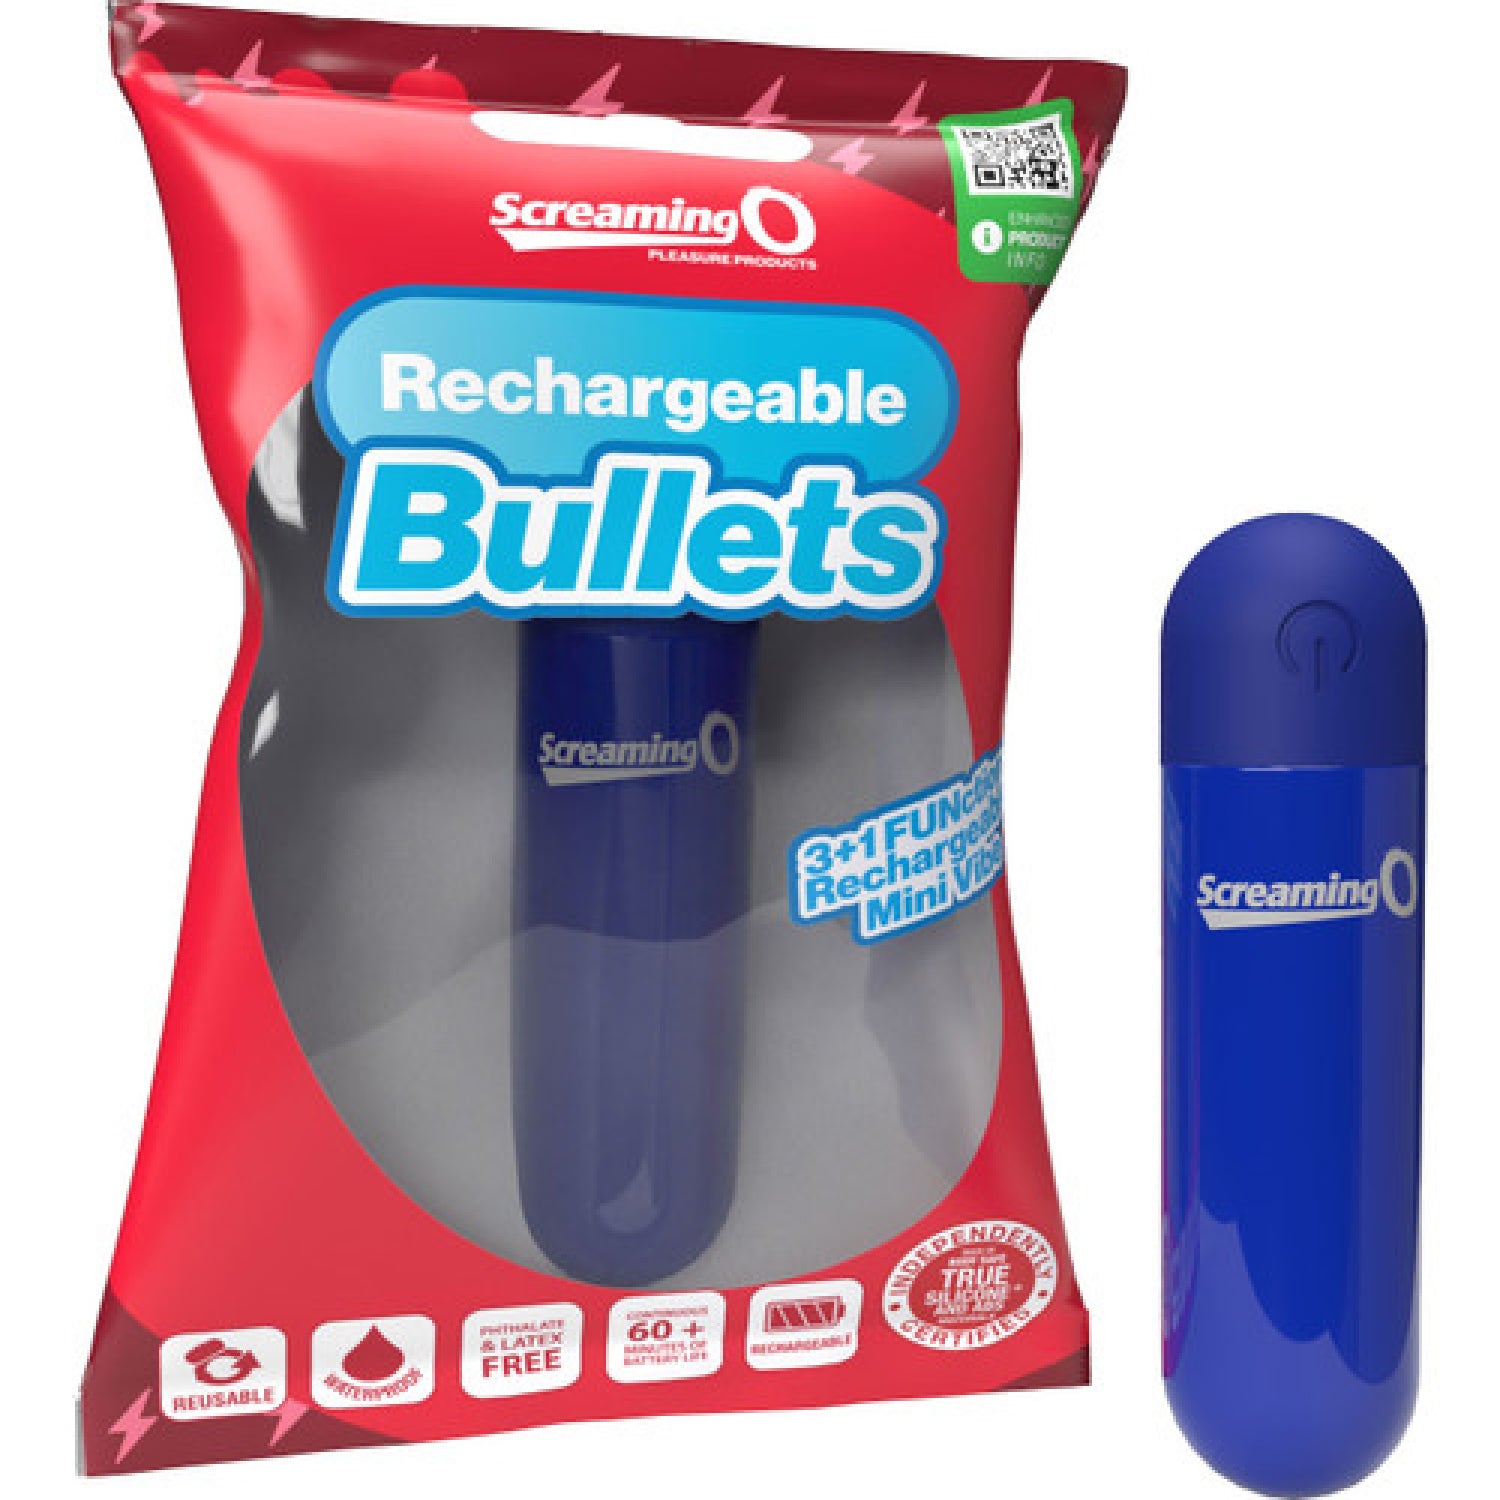 Screaming O Rechargeable Bullets - Blue-2